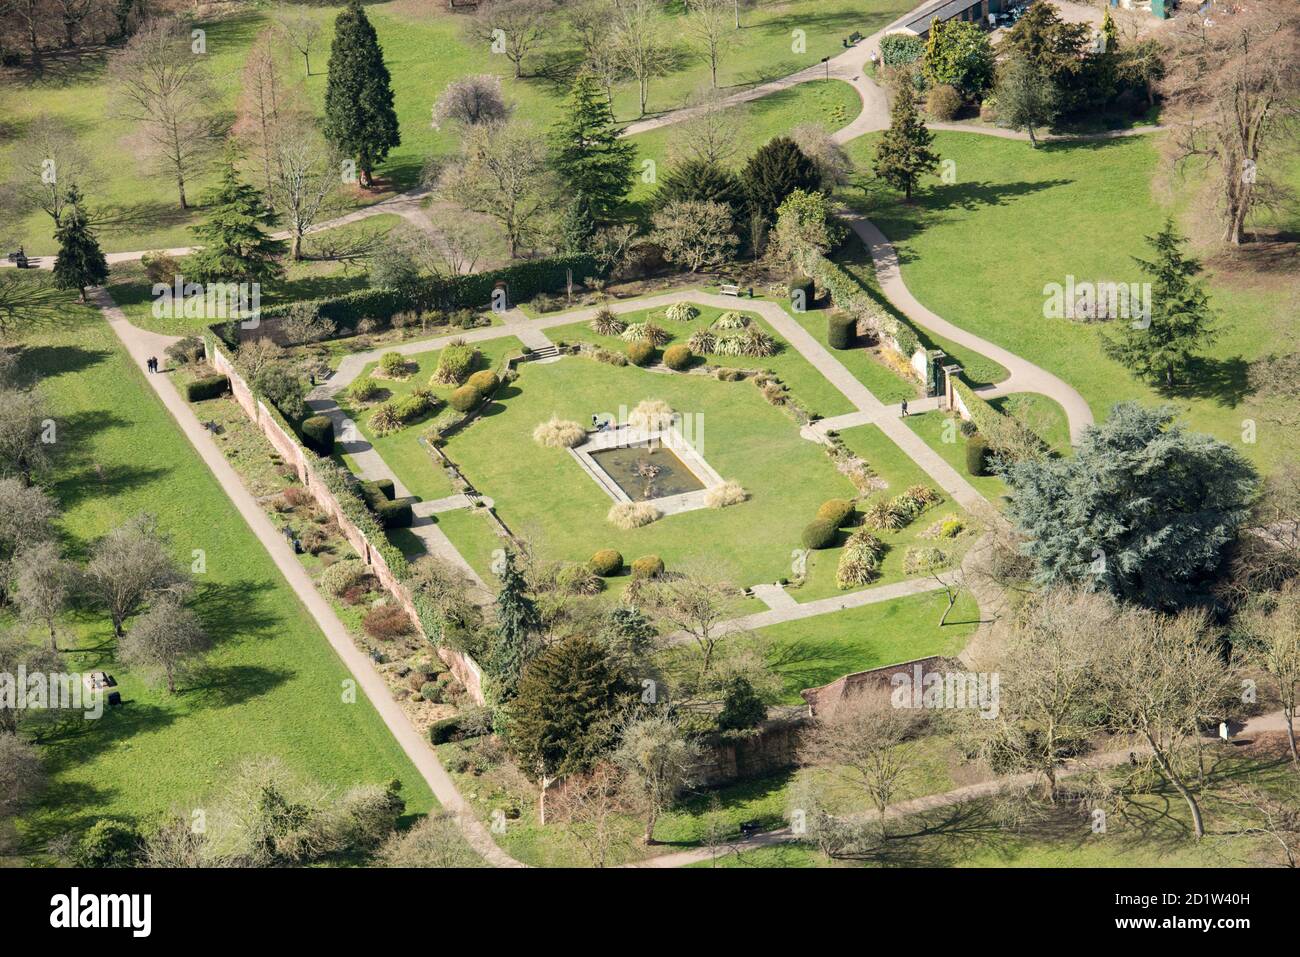 The George V Memorial Garden at Canons Park, Harrow, London, 2018. Aerial view. Stock Photo